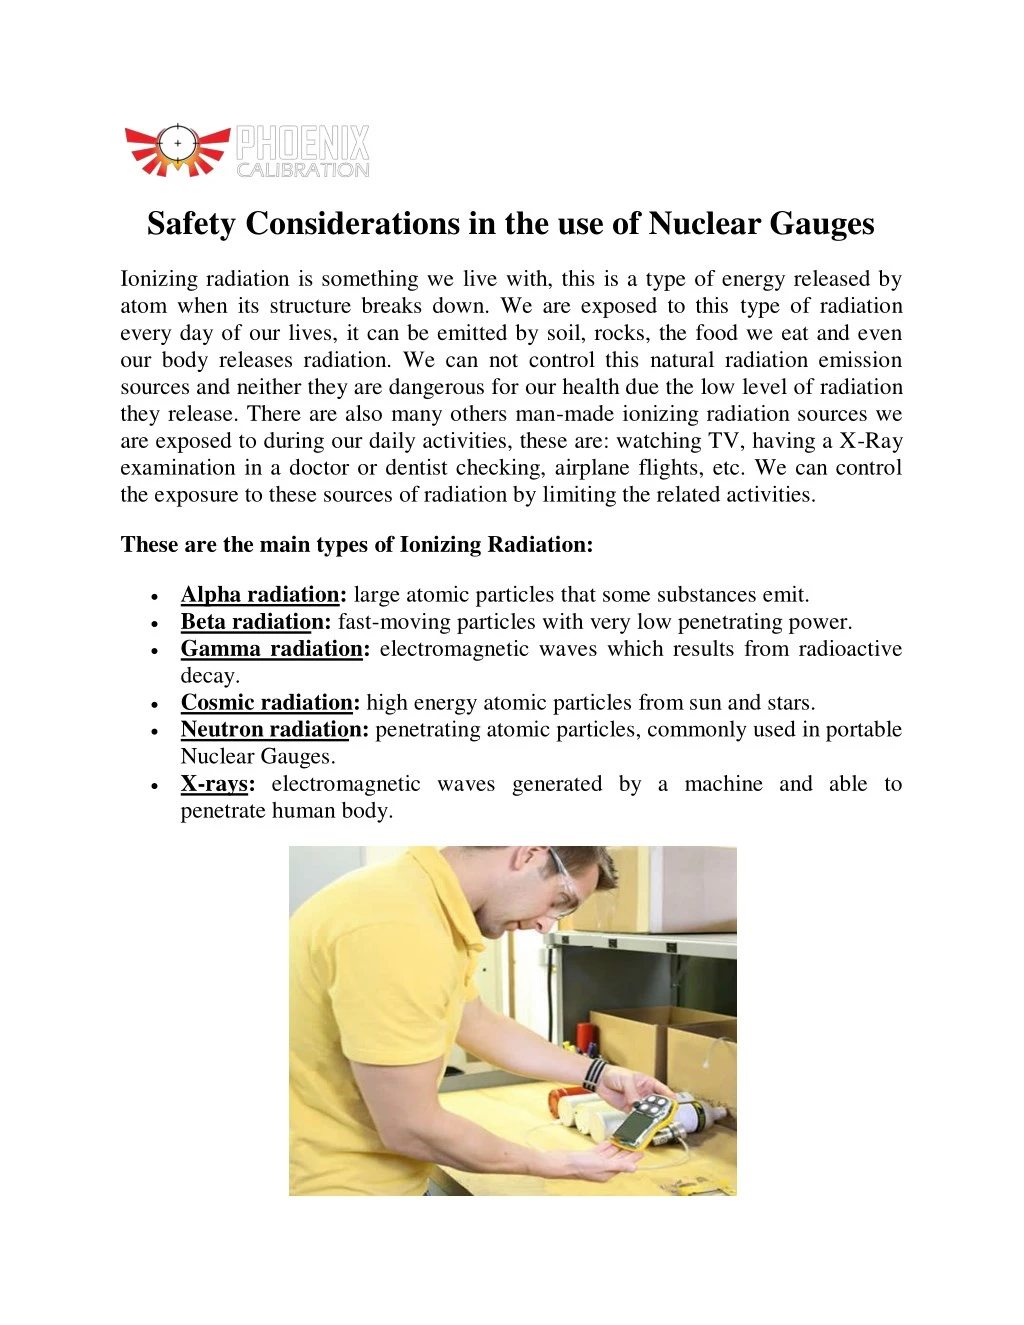 safety considerations in the use of nuclear gauges